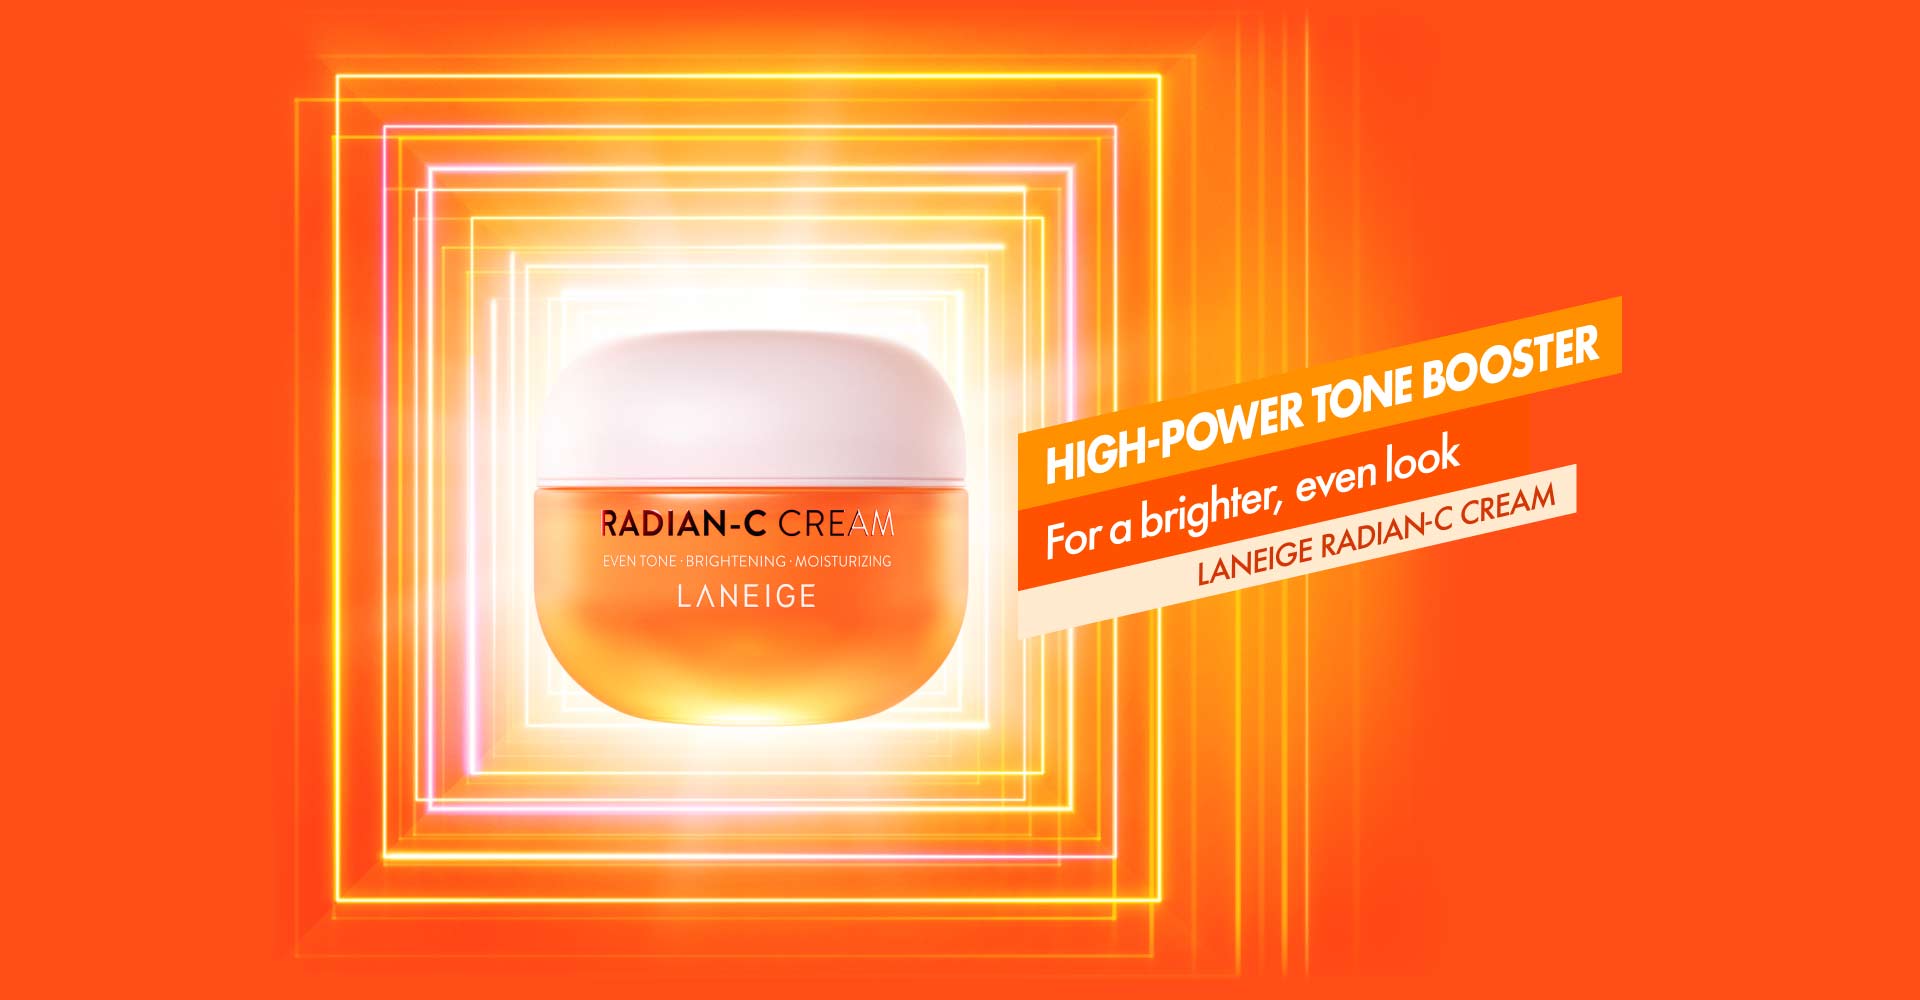 HIGH-POWER TONE BOOSTER For a brighter, even look LANEIGE RADIAN-C CREAM